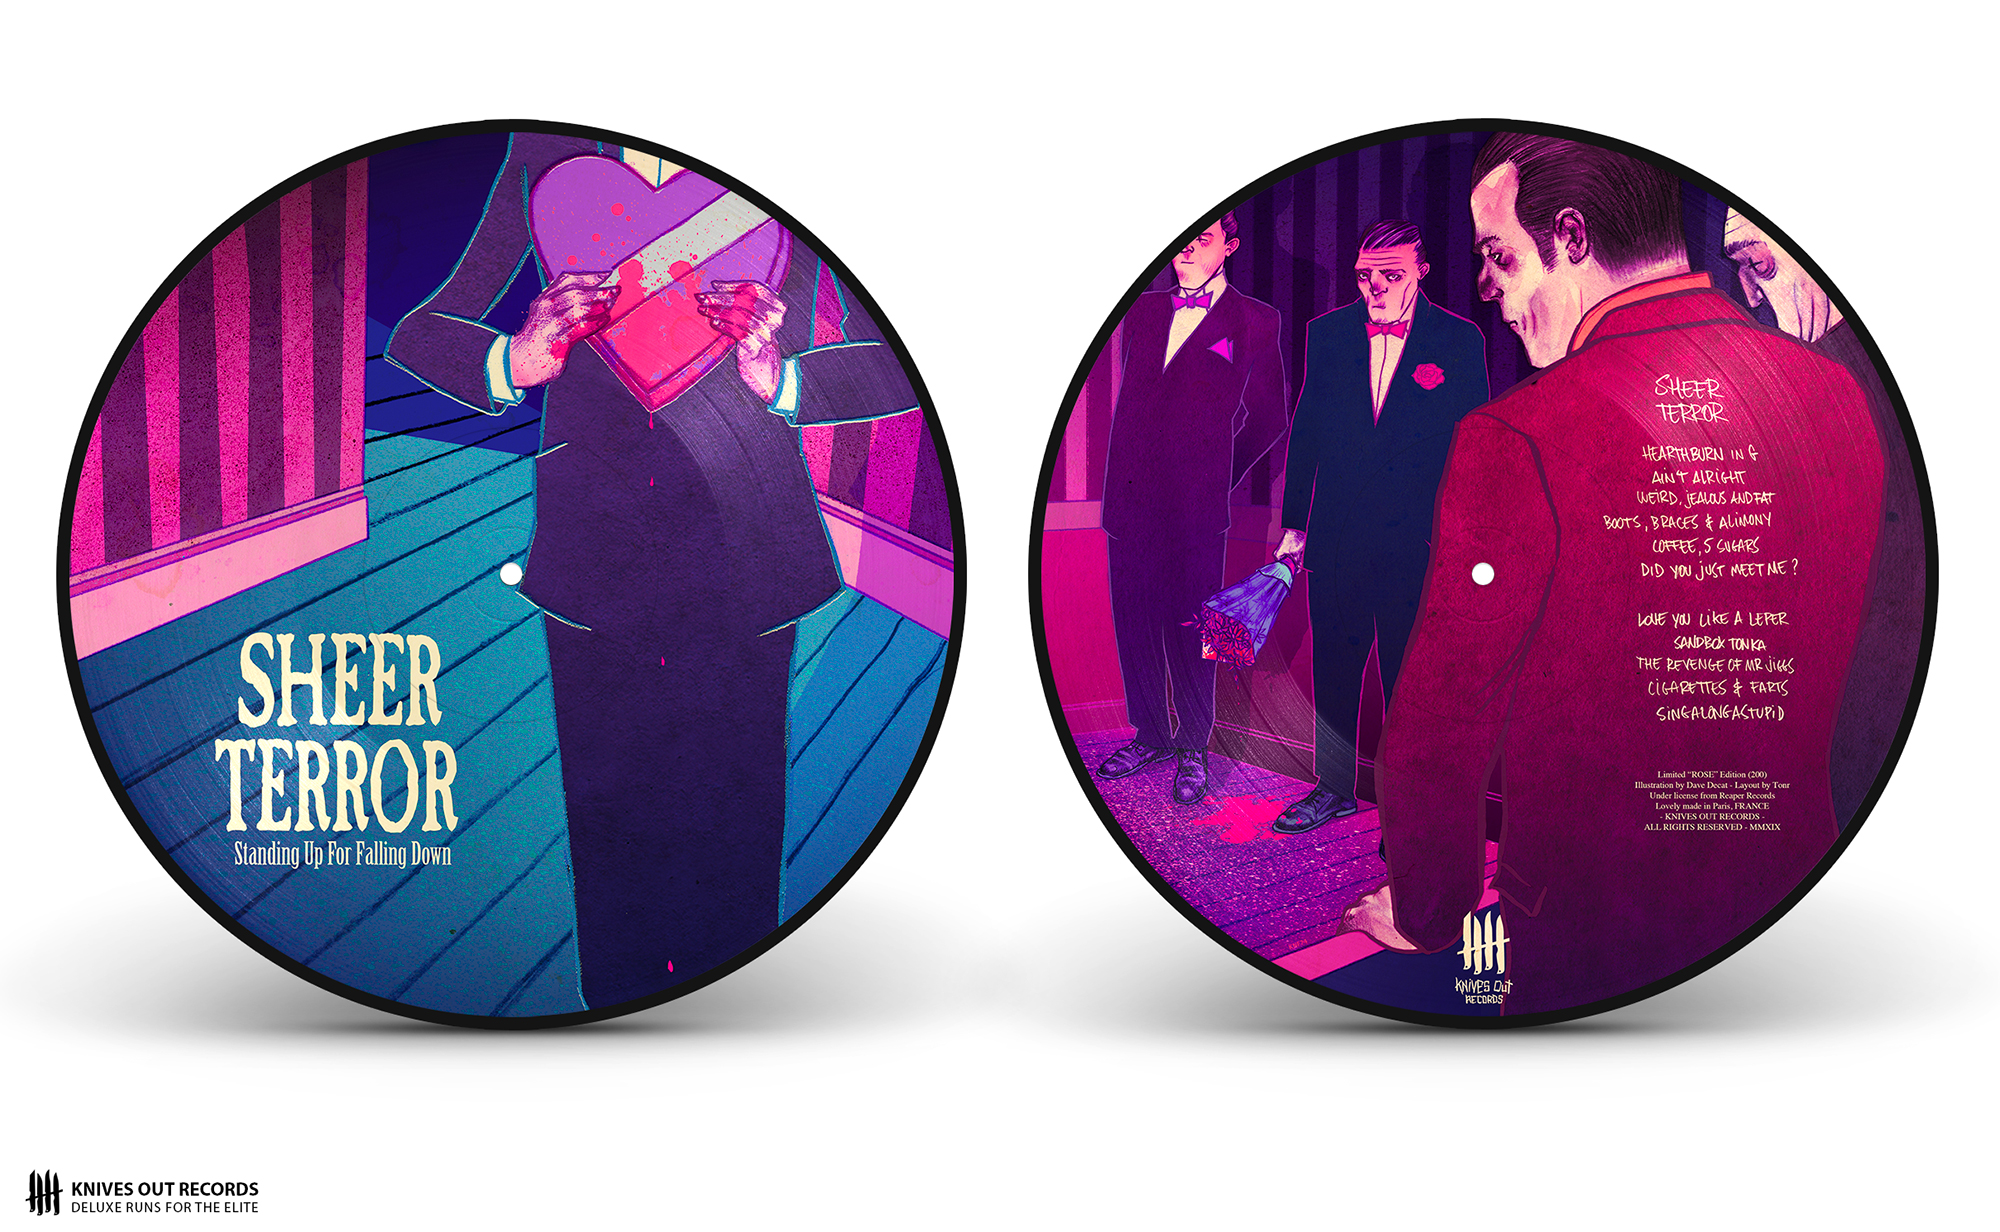 SHEER TERROR Standing Up For Falling Down picture disc vinyl - Rose Edition